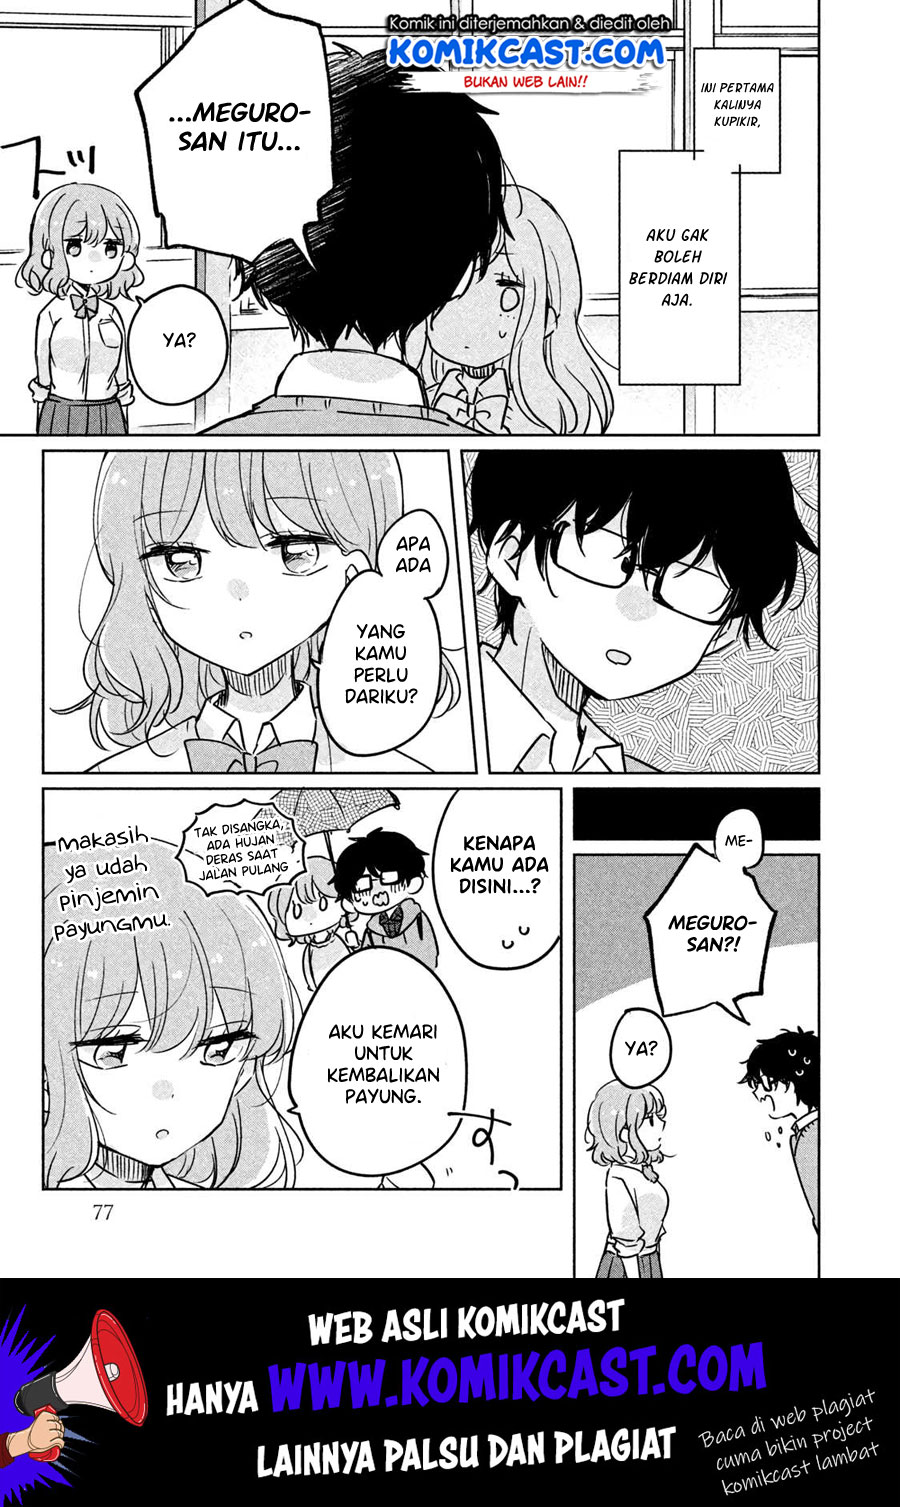 It’s Not Meguro-san’s First Time Chapter 6